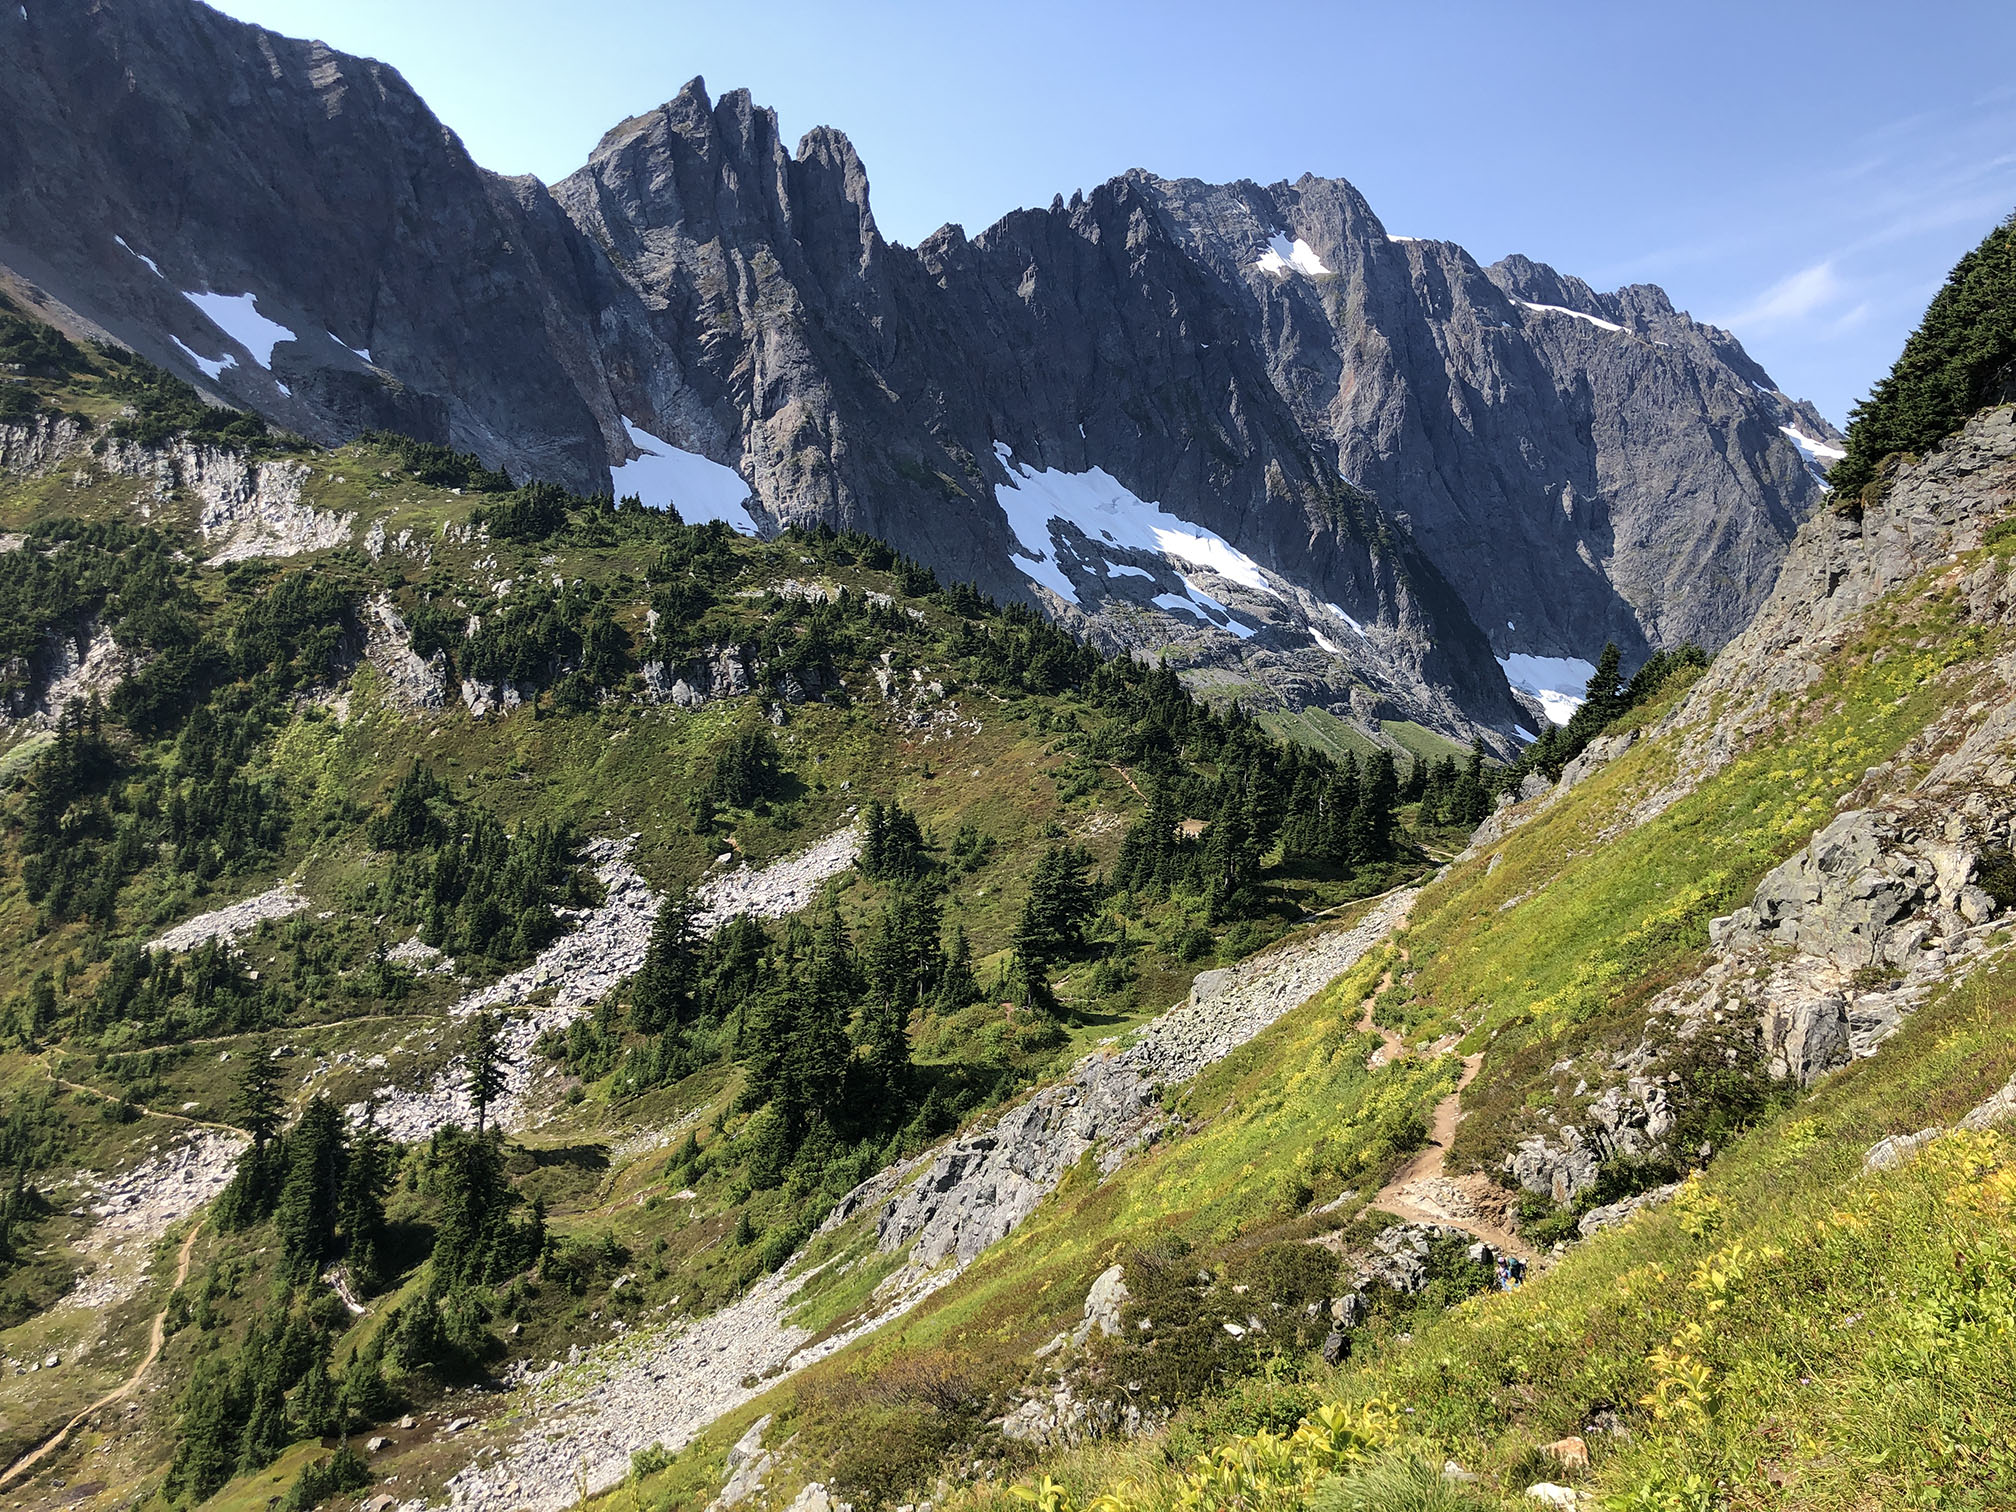 Beautiful hike in the Northern Cascades, good for backpacking